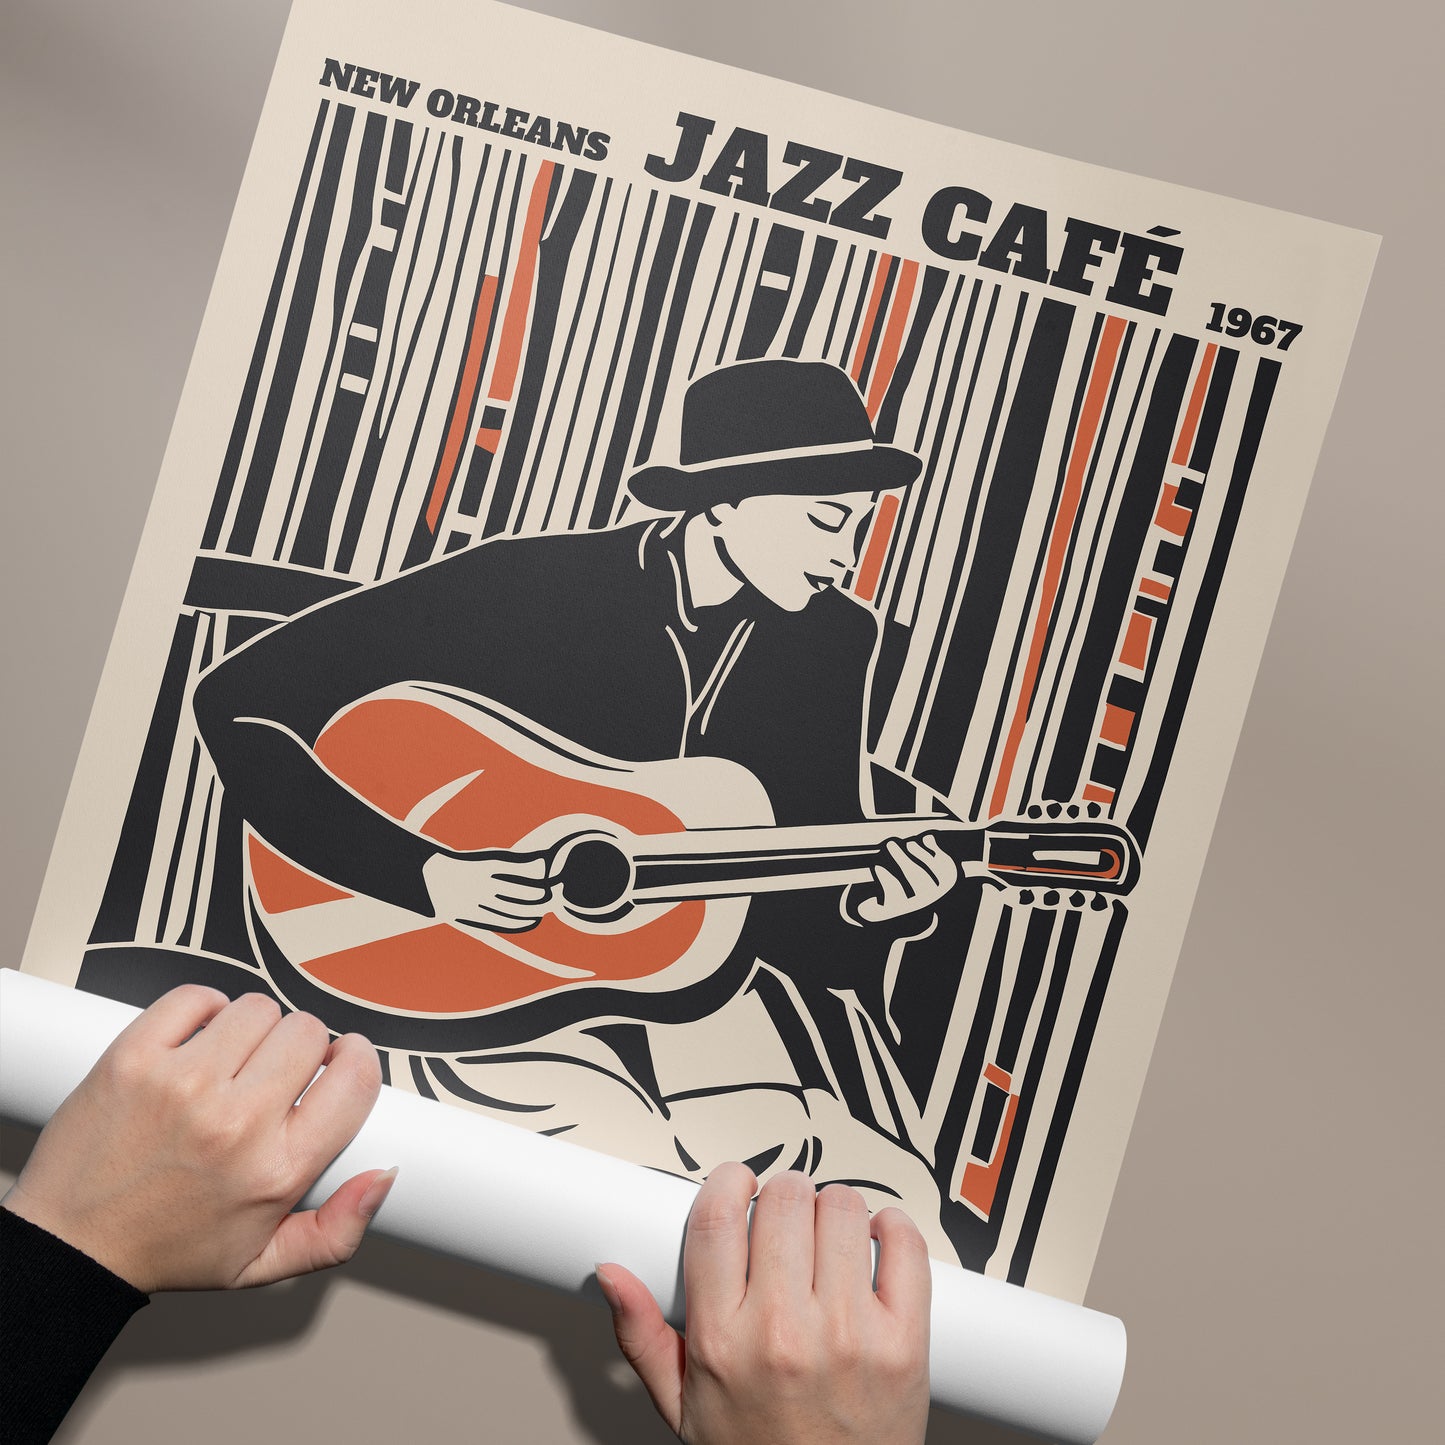 New Orleans Jazz Cafe Poster